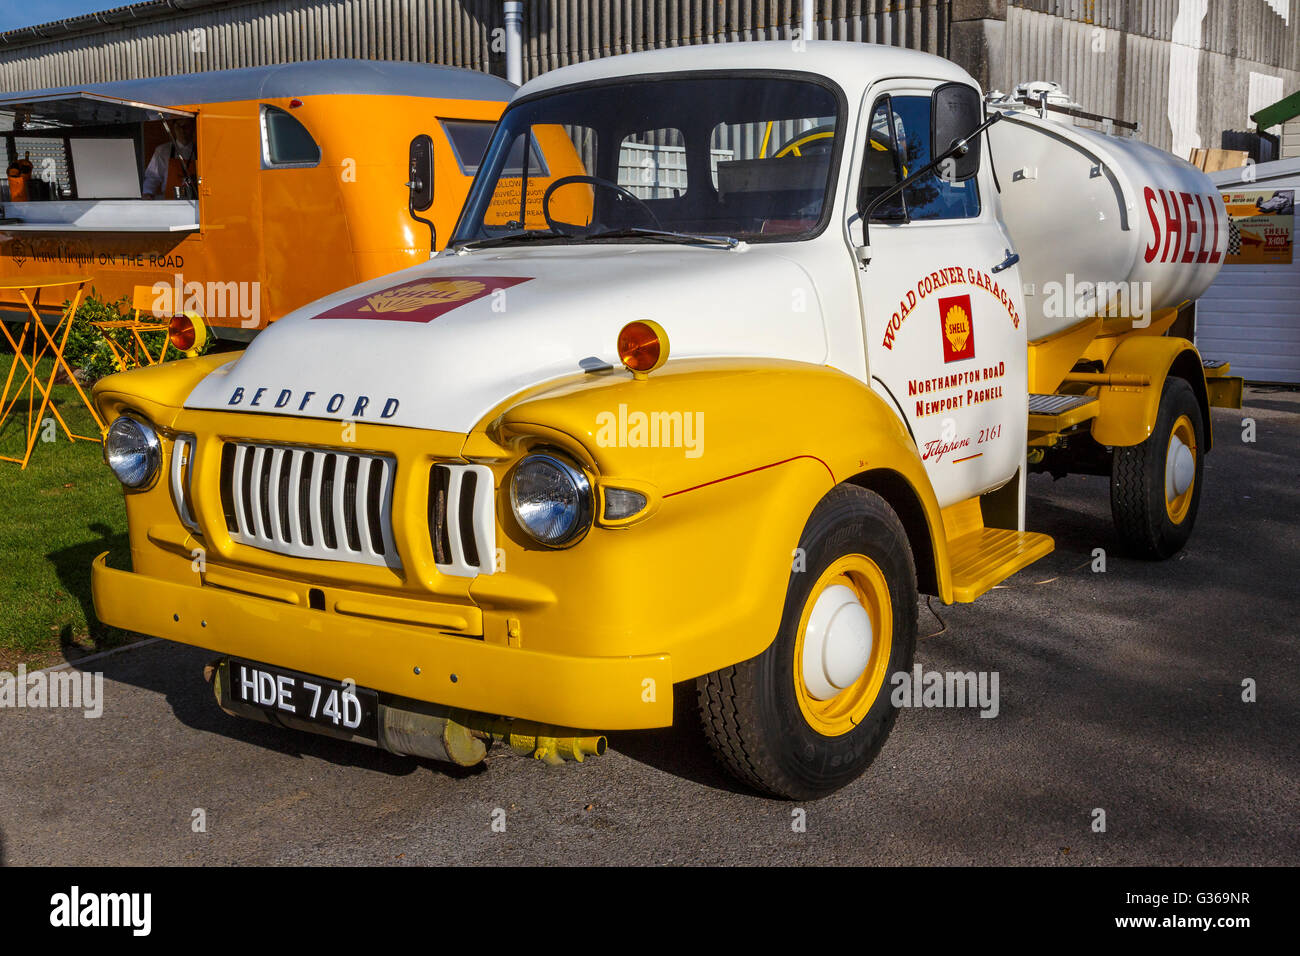 1966 Bedford TJ with Shell livery and tanker bodywork, HDE74D. Display at the 2015 Goodwood Revival, Sussex, UK. Stock Photo